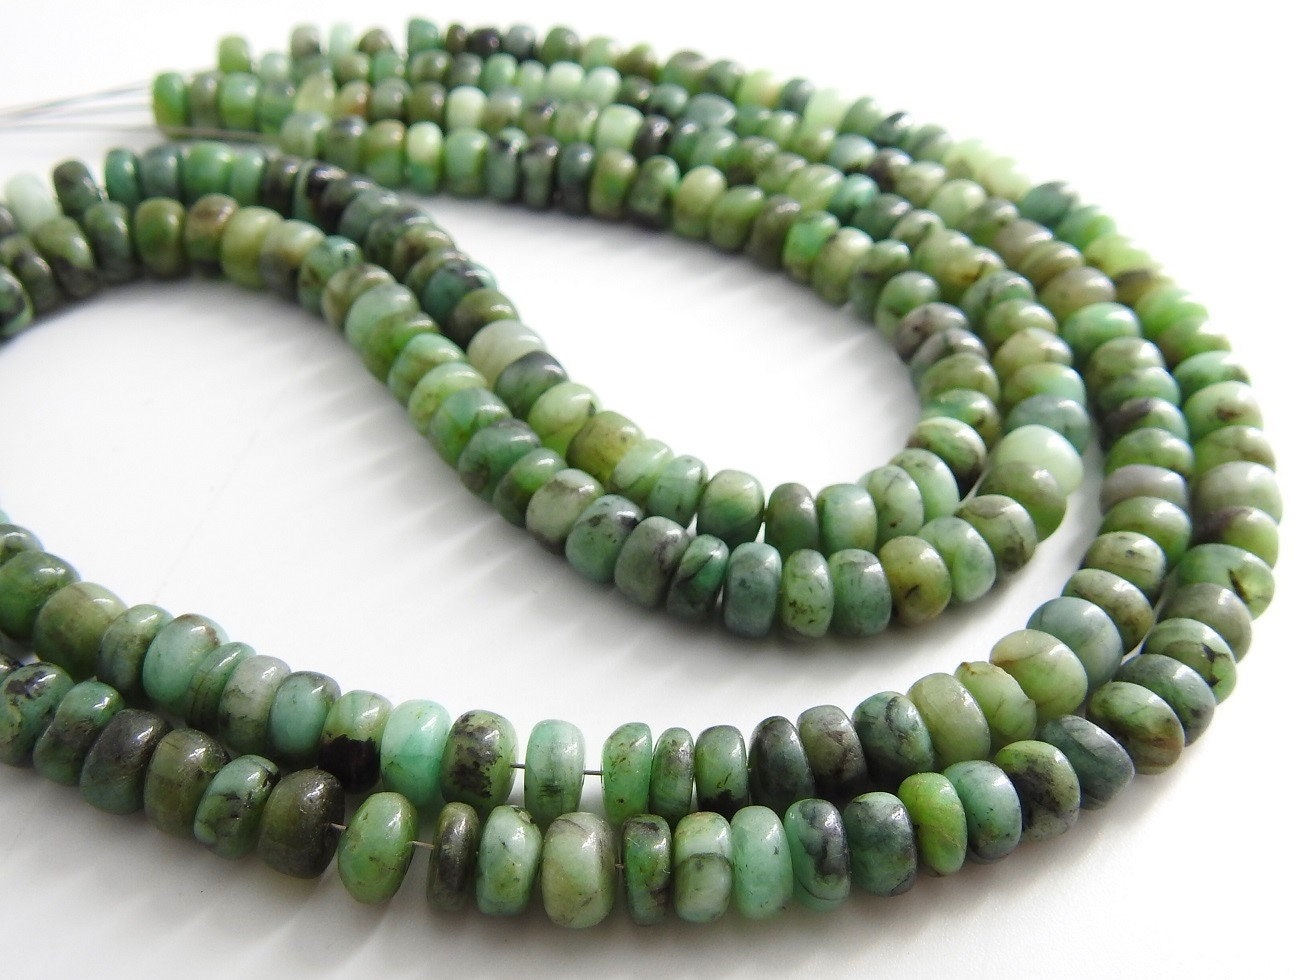 Emerald Smooth Roundel Bead,Shaded,Loose Stone,Handmade,Wholesale Price,New Arrival,18Inch Strand 100%Natural PME(B12) | Save 33% - Rajasthan Living 13